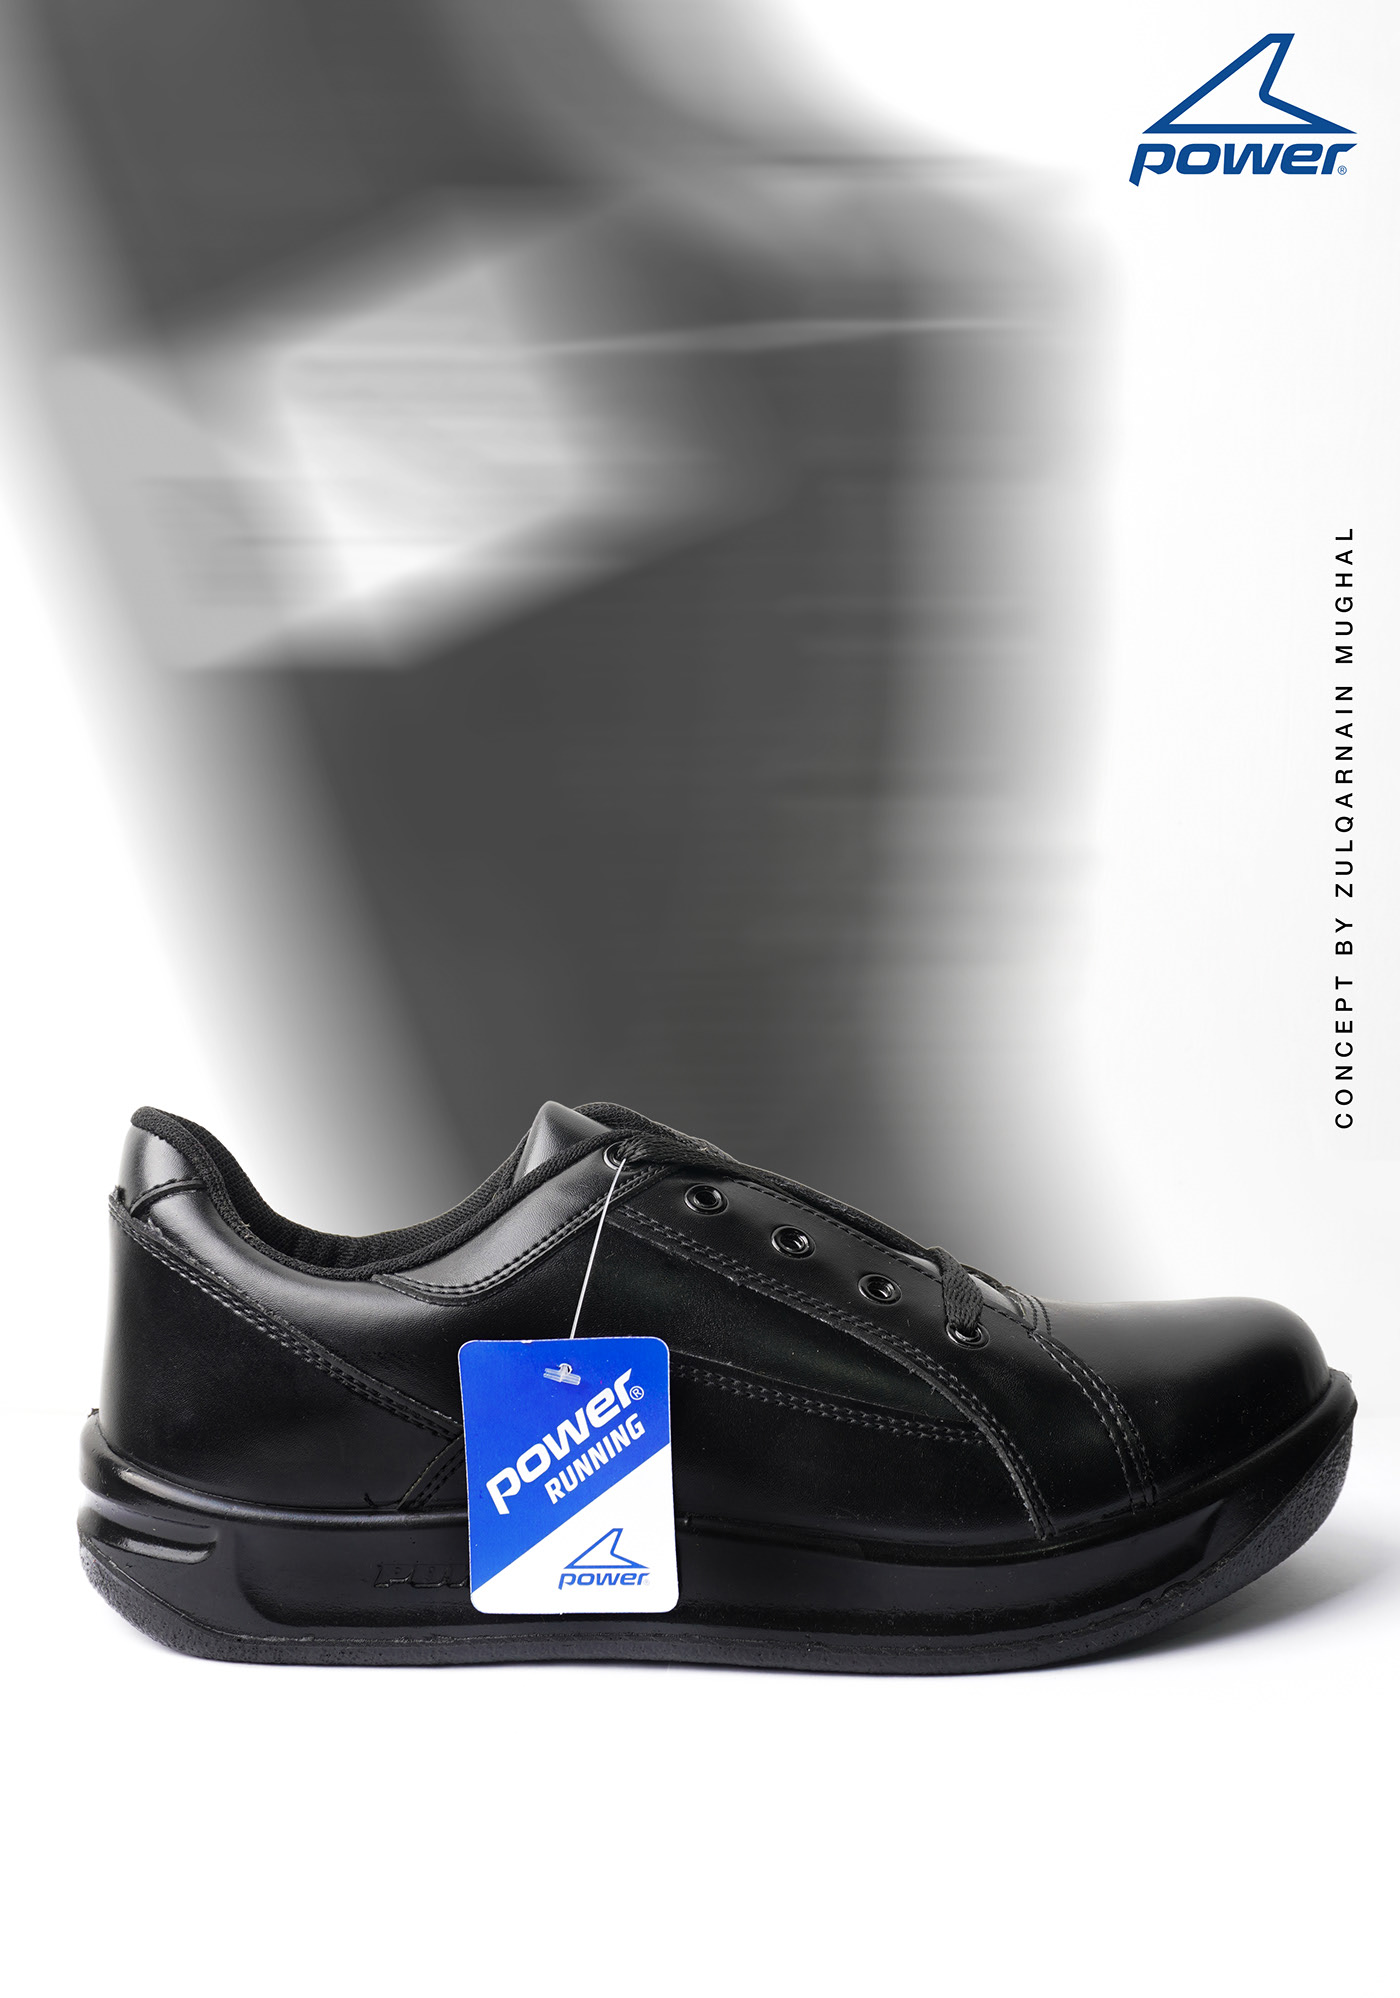 Power Shoes - Product Photography - adrotize 02